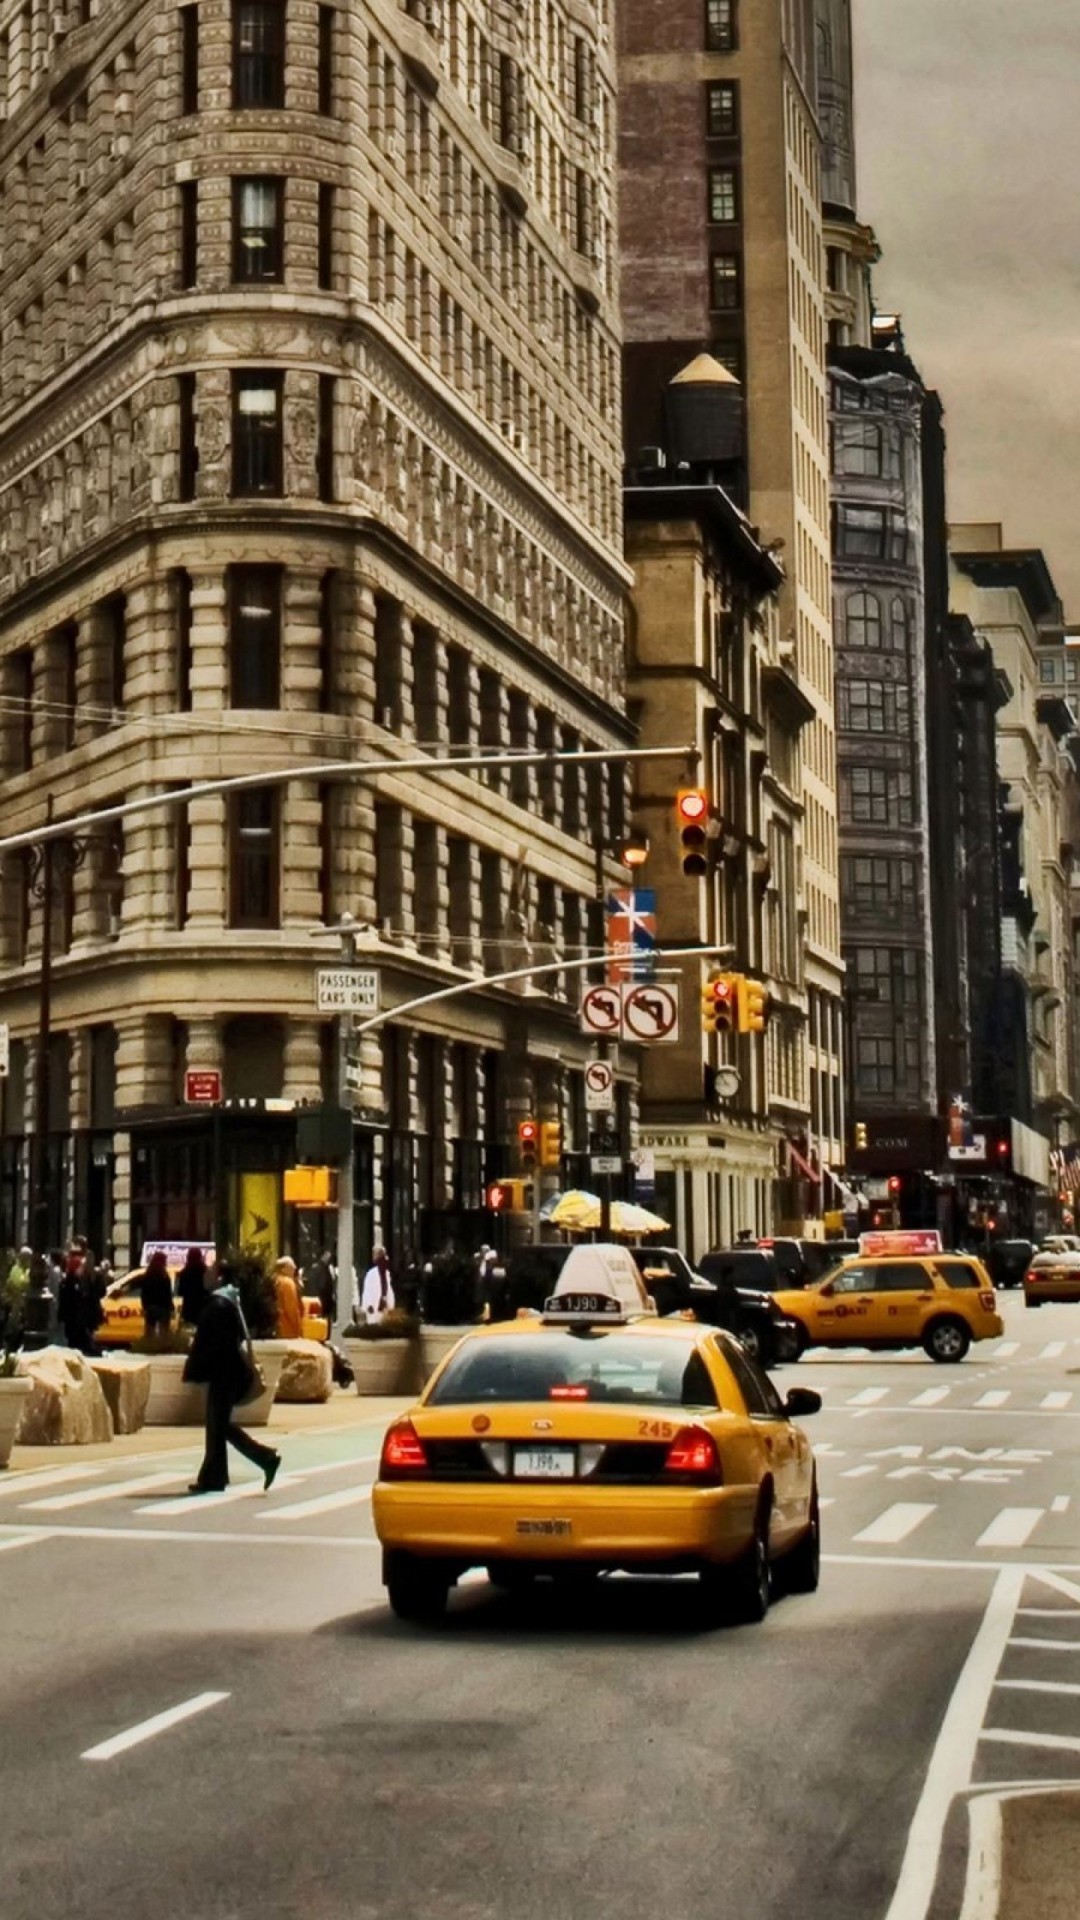 new york iphone wallpaper,vehicle,car,mode of transport,taxi,yellow